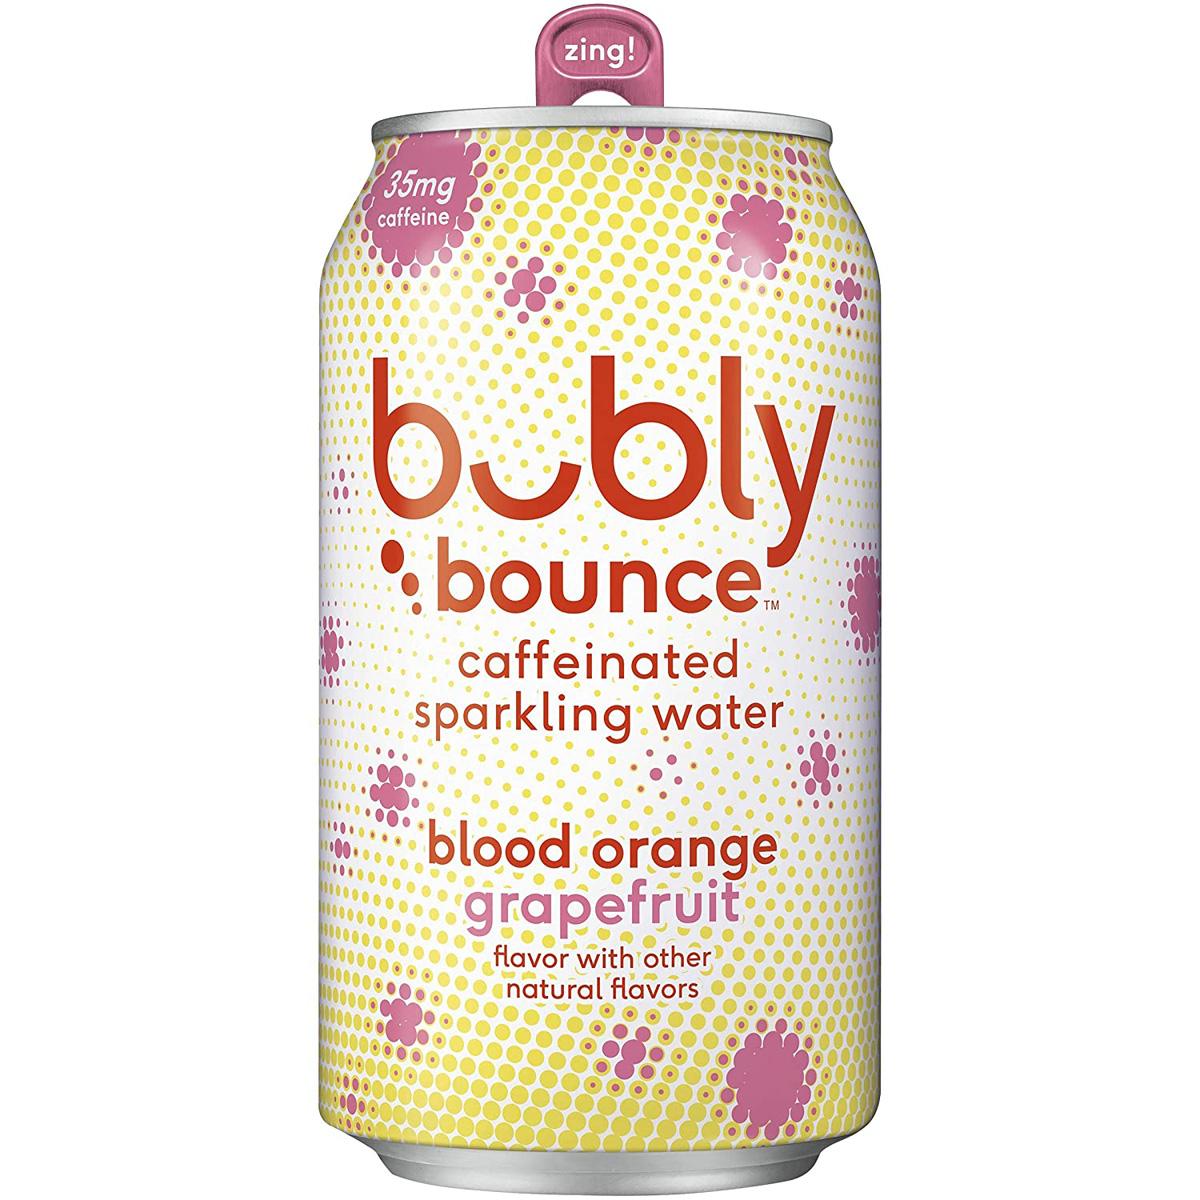 18 Bubly Bounce Blood Orange Grapefruit Caffeinated Sparkling Water for $7.61